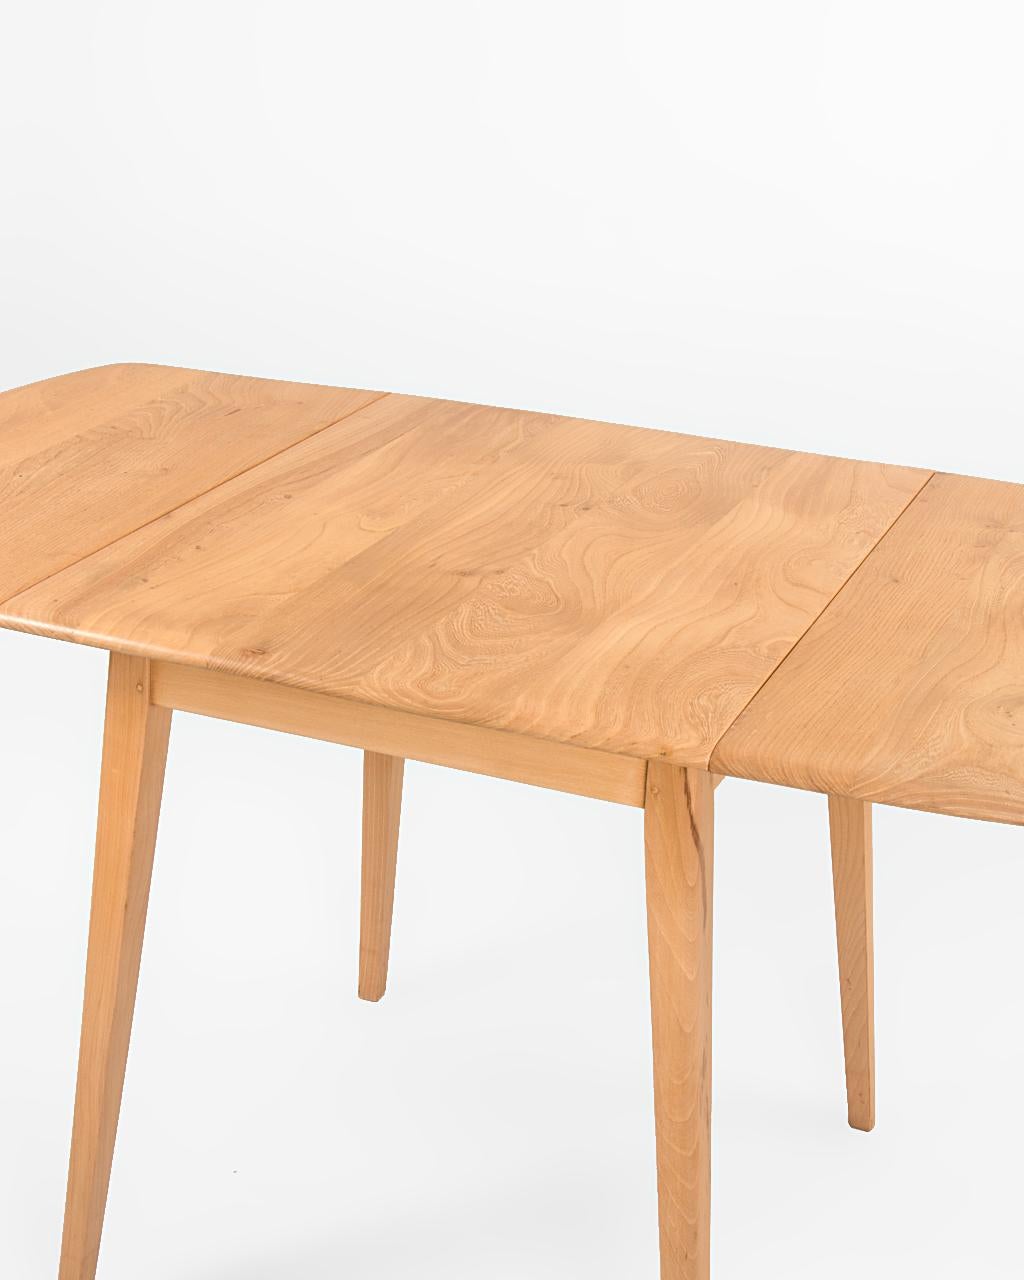 British Beech and Elm Foldable Dining Table by L. Ercolani for Ercol, circa 1960 For Sale